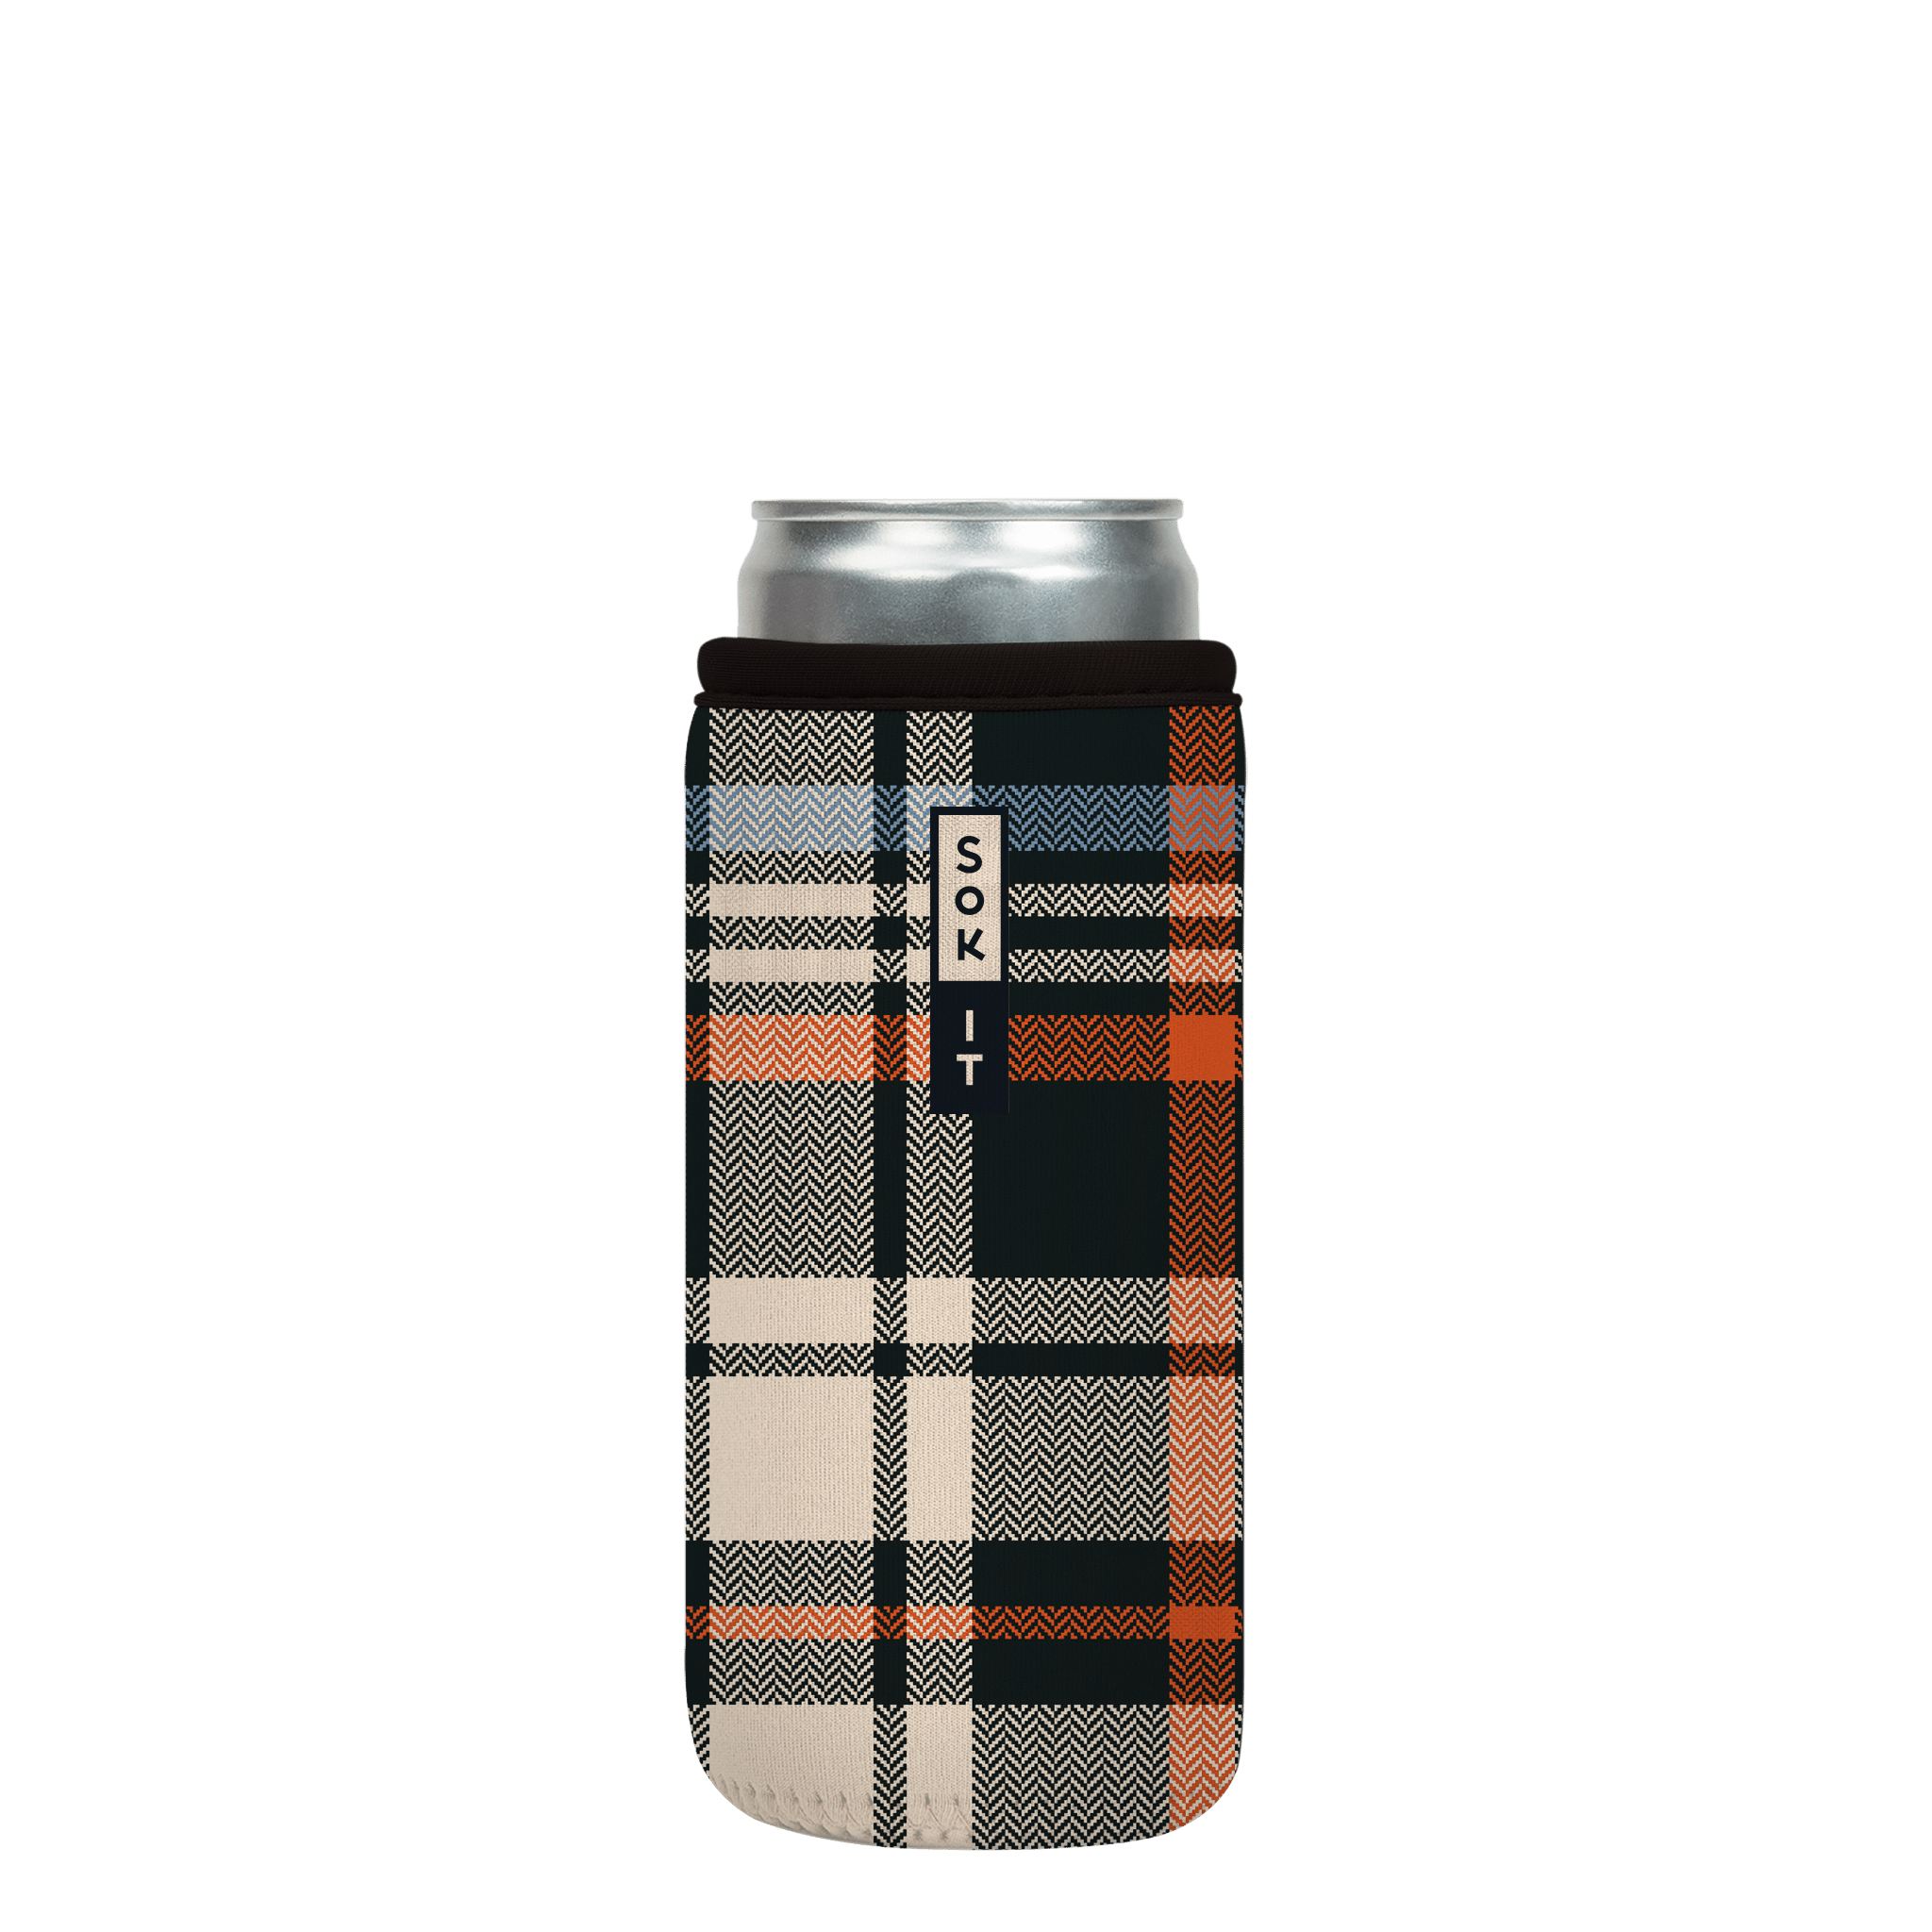 CanSok Fall Flannel 12oz Slim Can